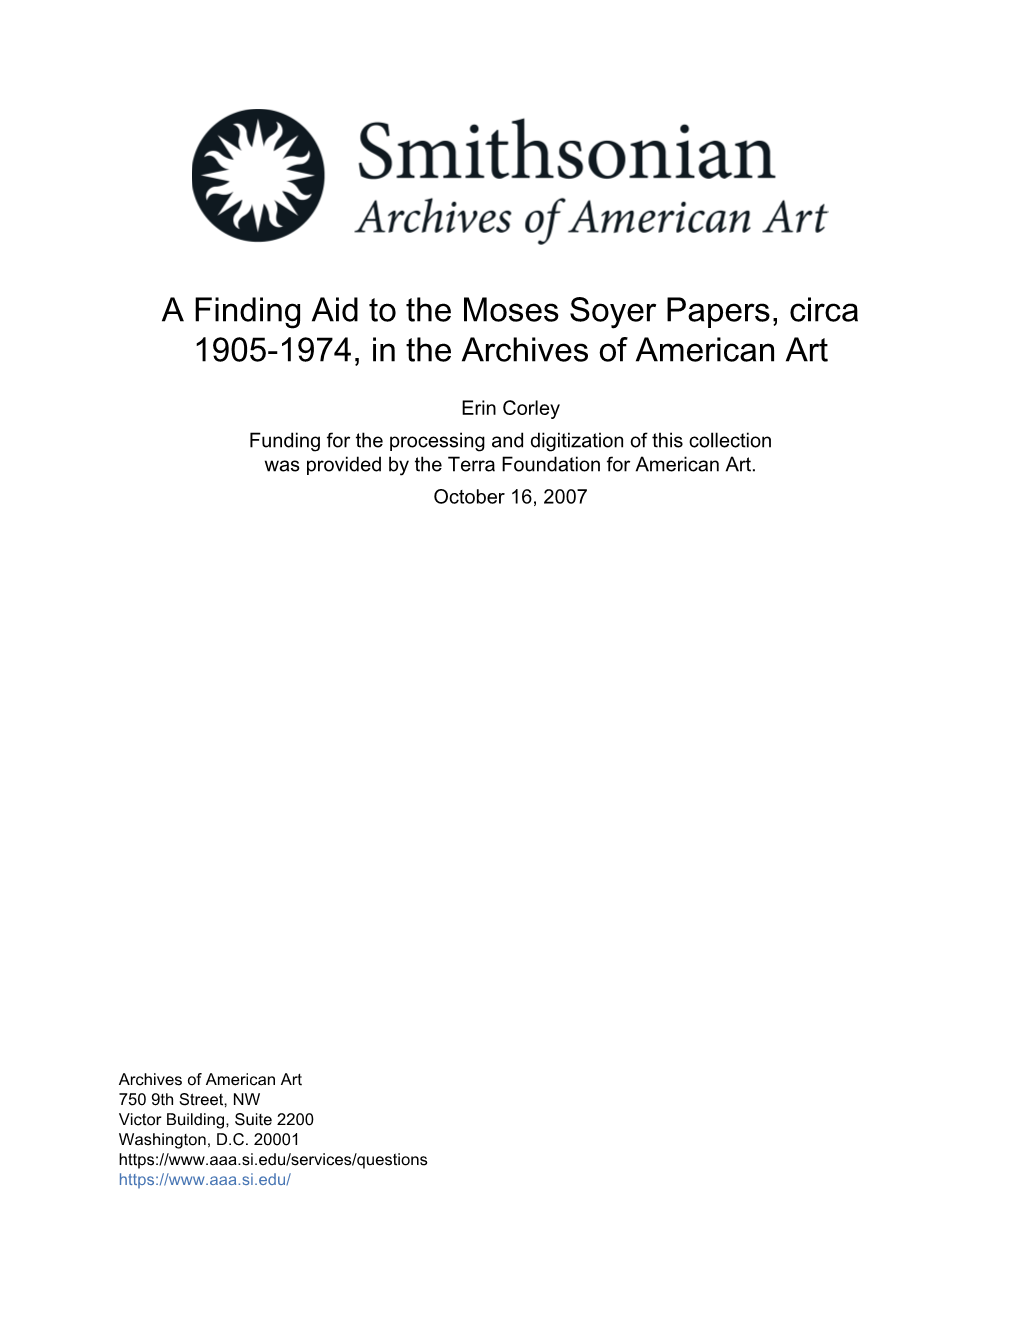 A Finding Aid to the Moses Soyer Papers, Circa 1905-1974, in the Archives of American Art